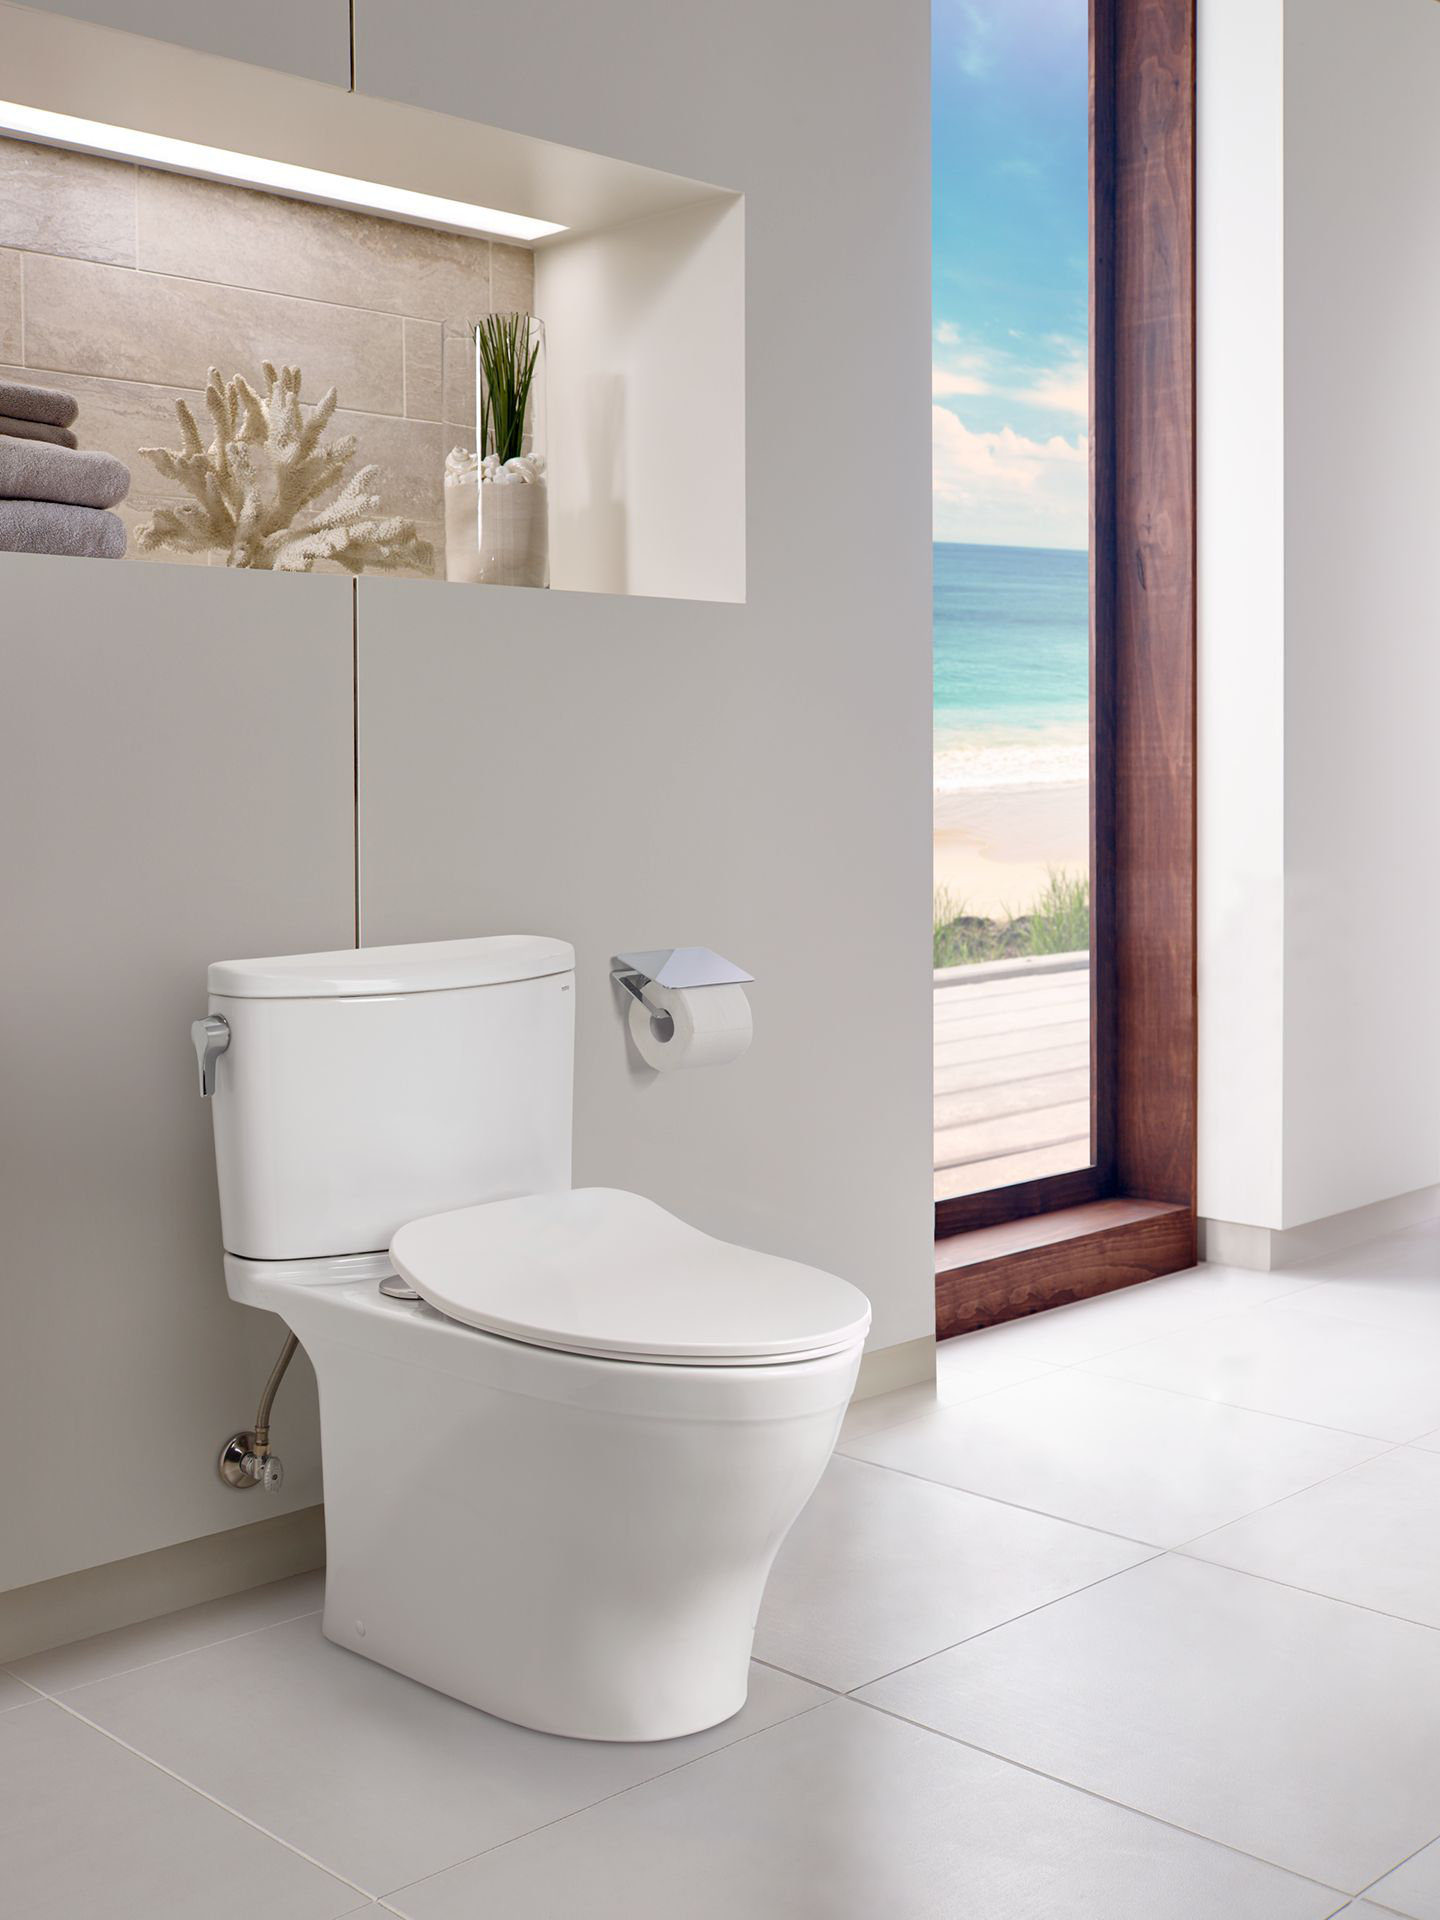 TOTO Nexus GPF Elongated Two Piece Toilet High Efficiency Flush Seat Included Wayfair